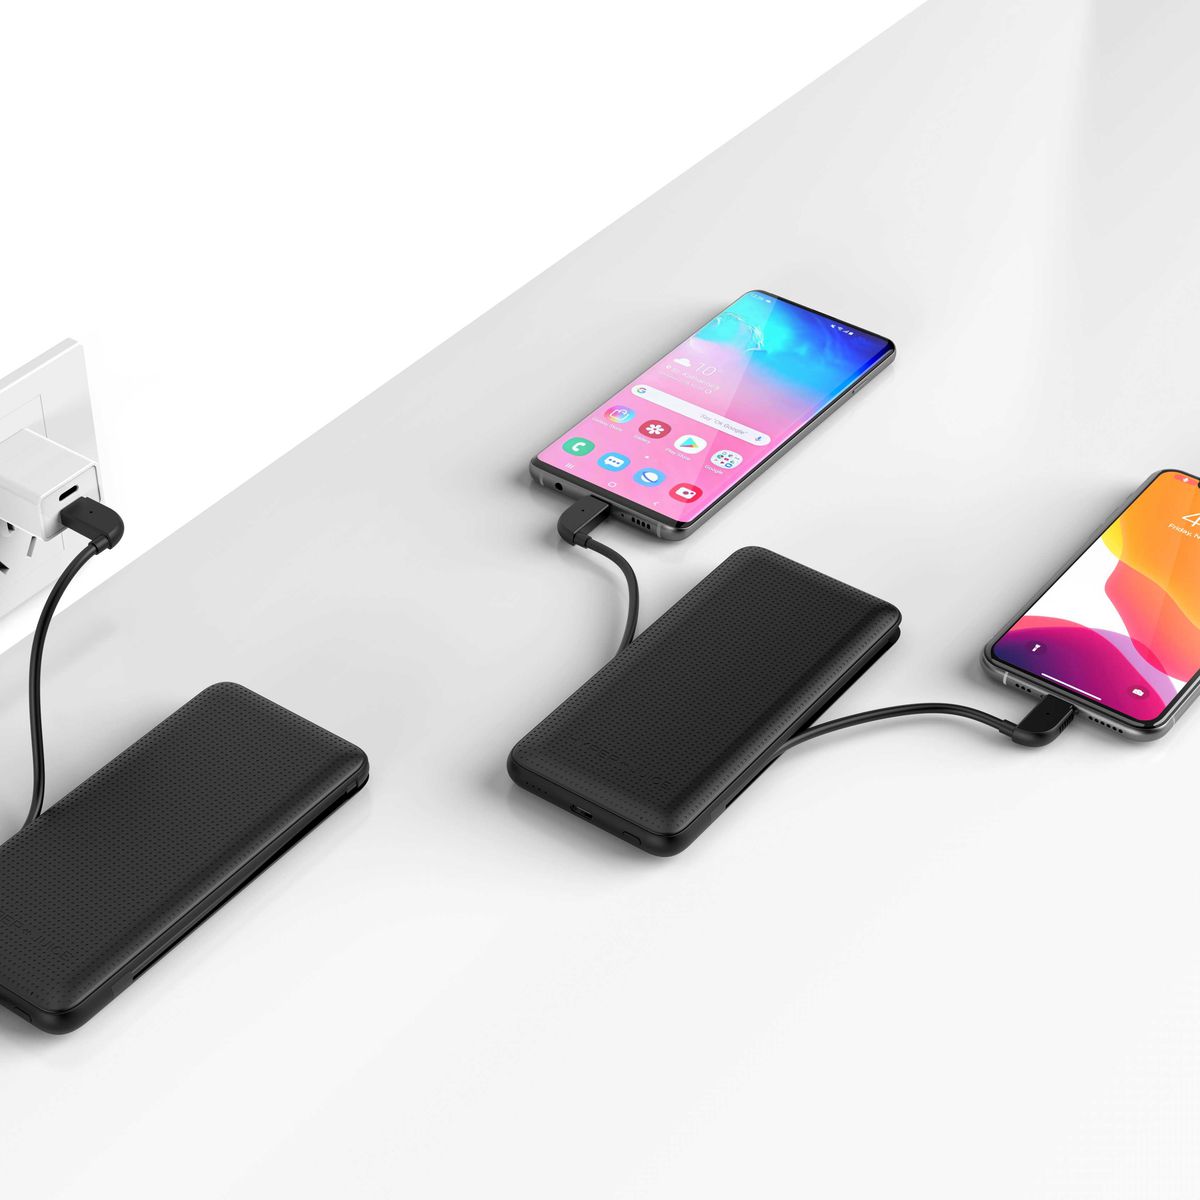 New HyperJuice USB-C and Lightning Battery Pack Offers 18W of Power and  10,000mAh Capacity - MacRumors